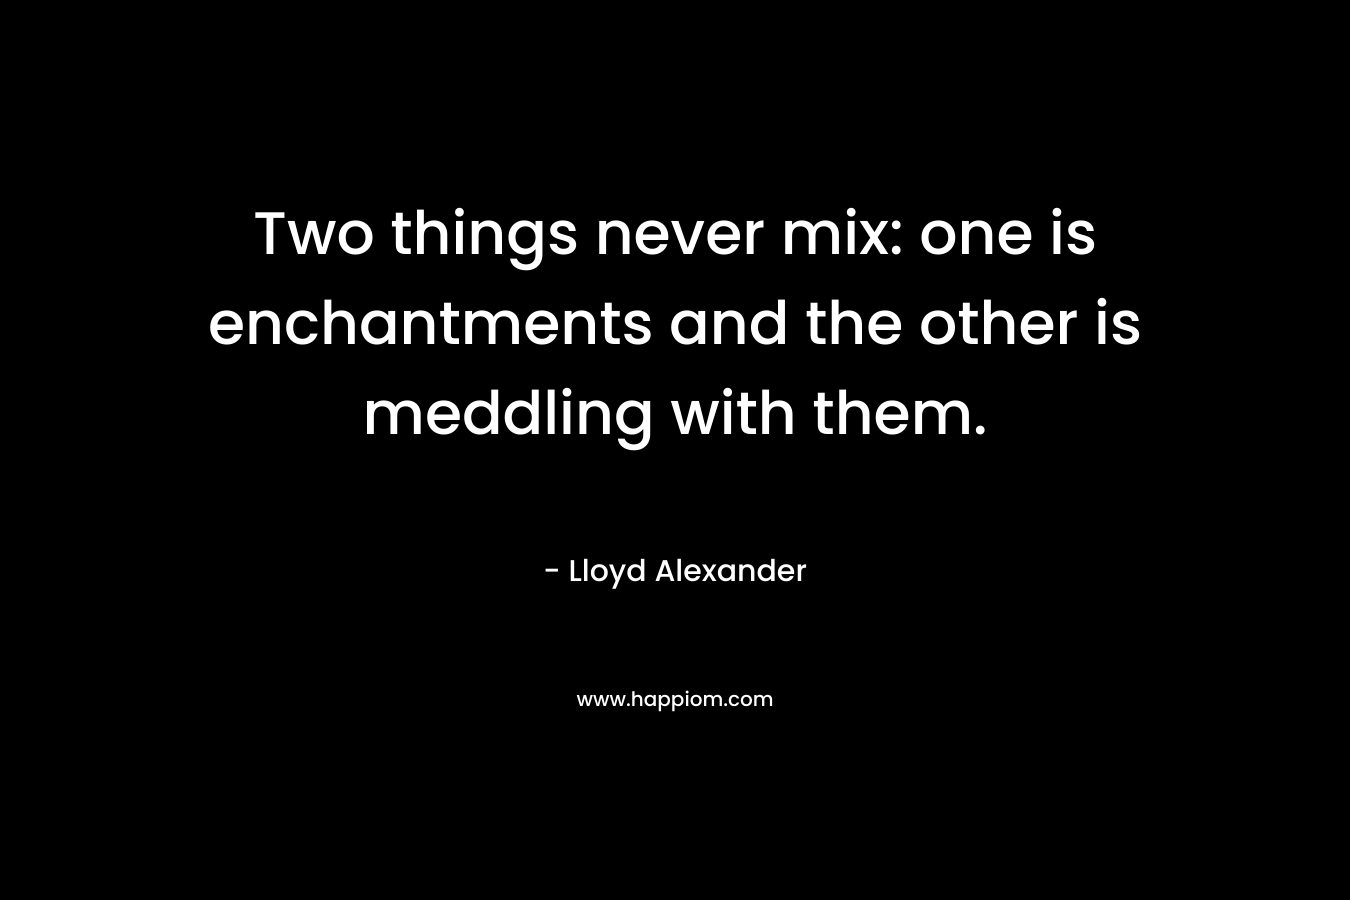 Two things never mix: one is enchantments and the other is meddling with them.